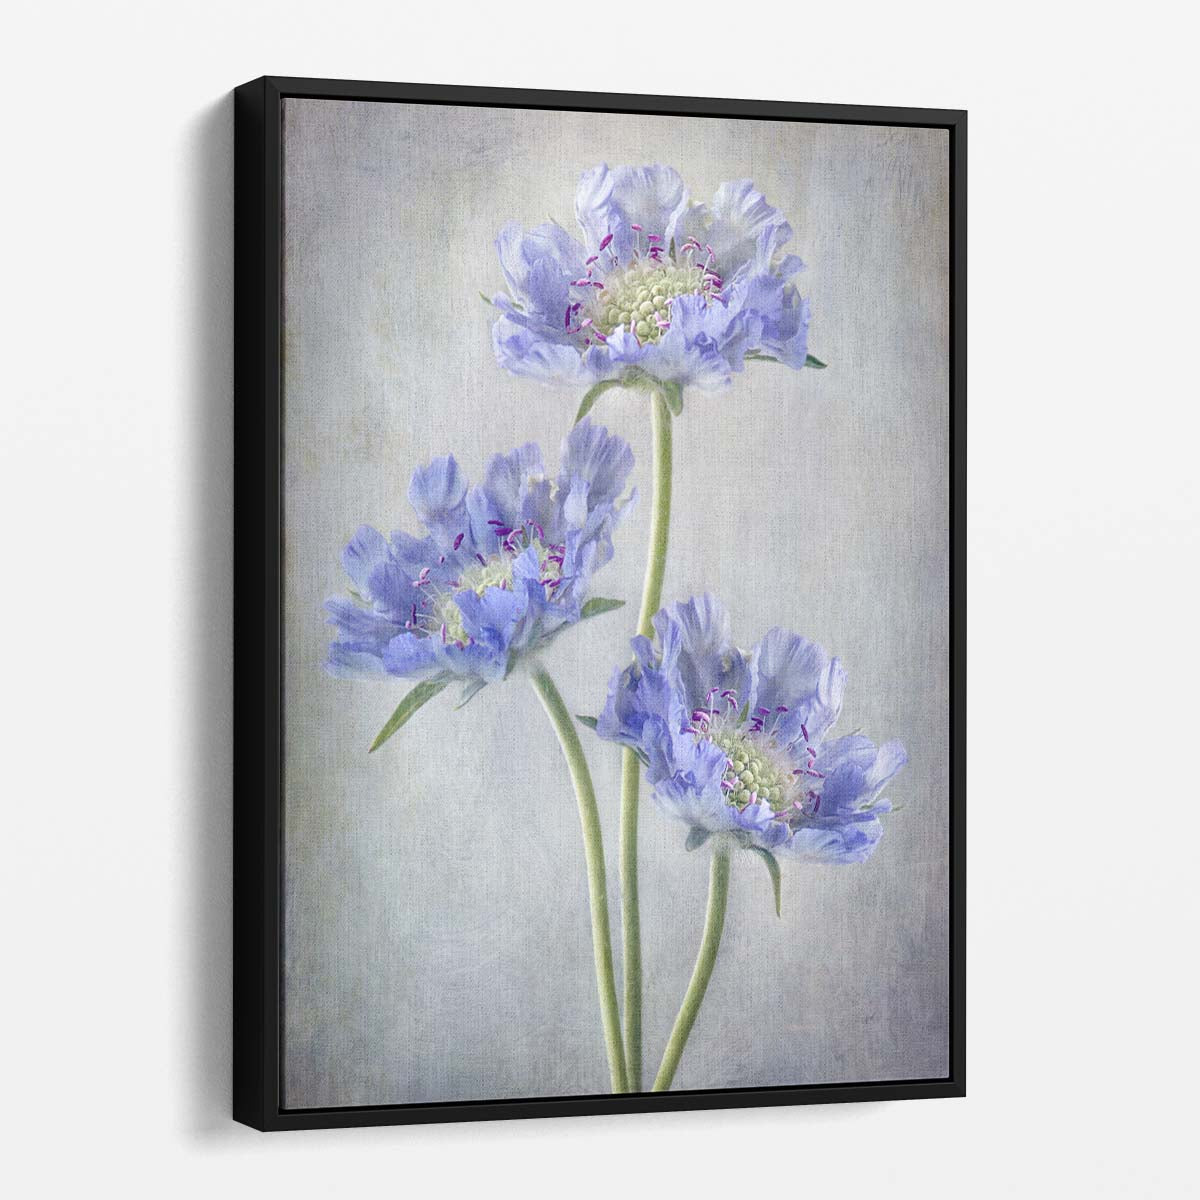 Scabiosa Pincushion Purple Flower Photography Still Life Floral Art by Mandy Disher by Luxuriance Designs, made in USA